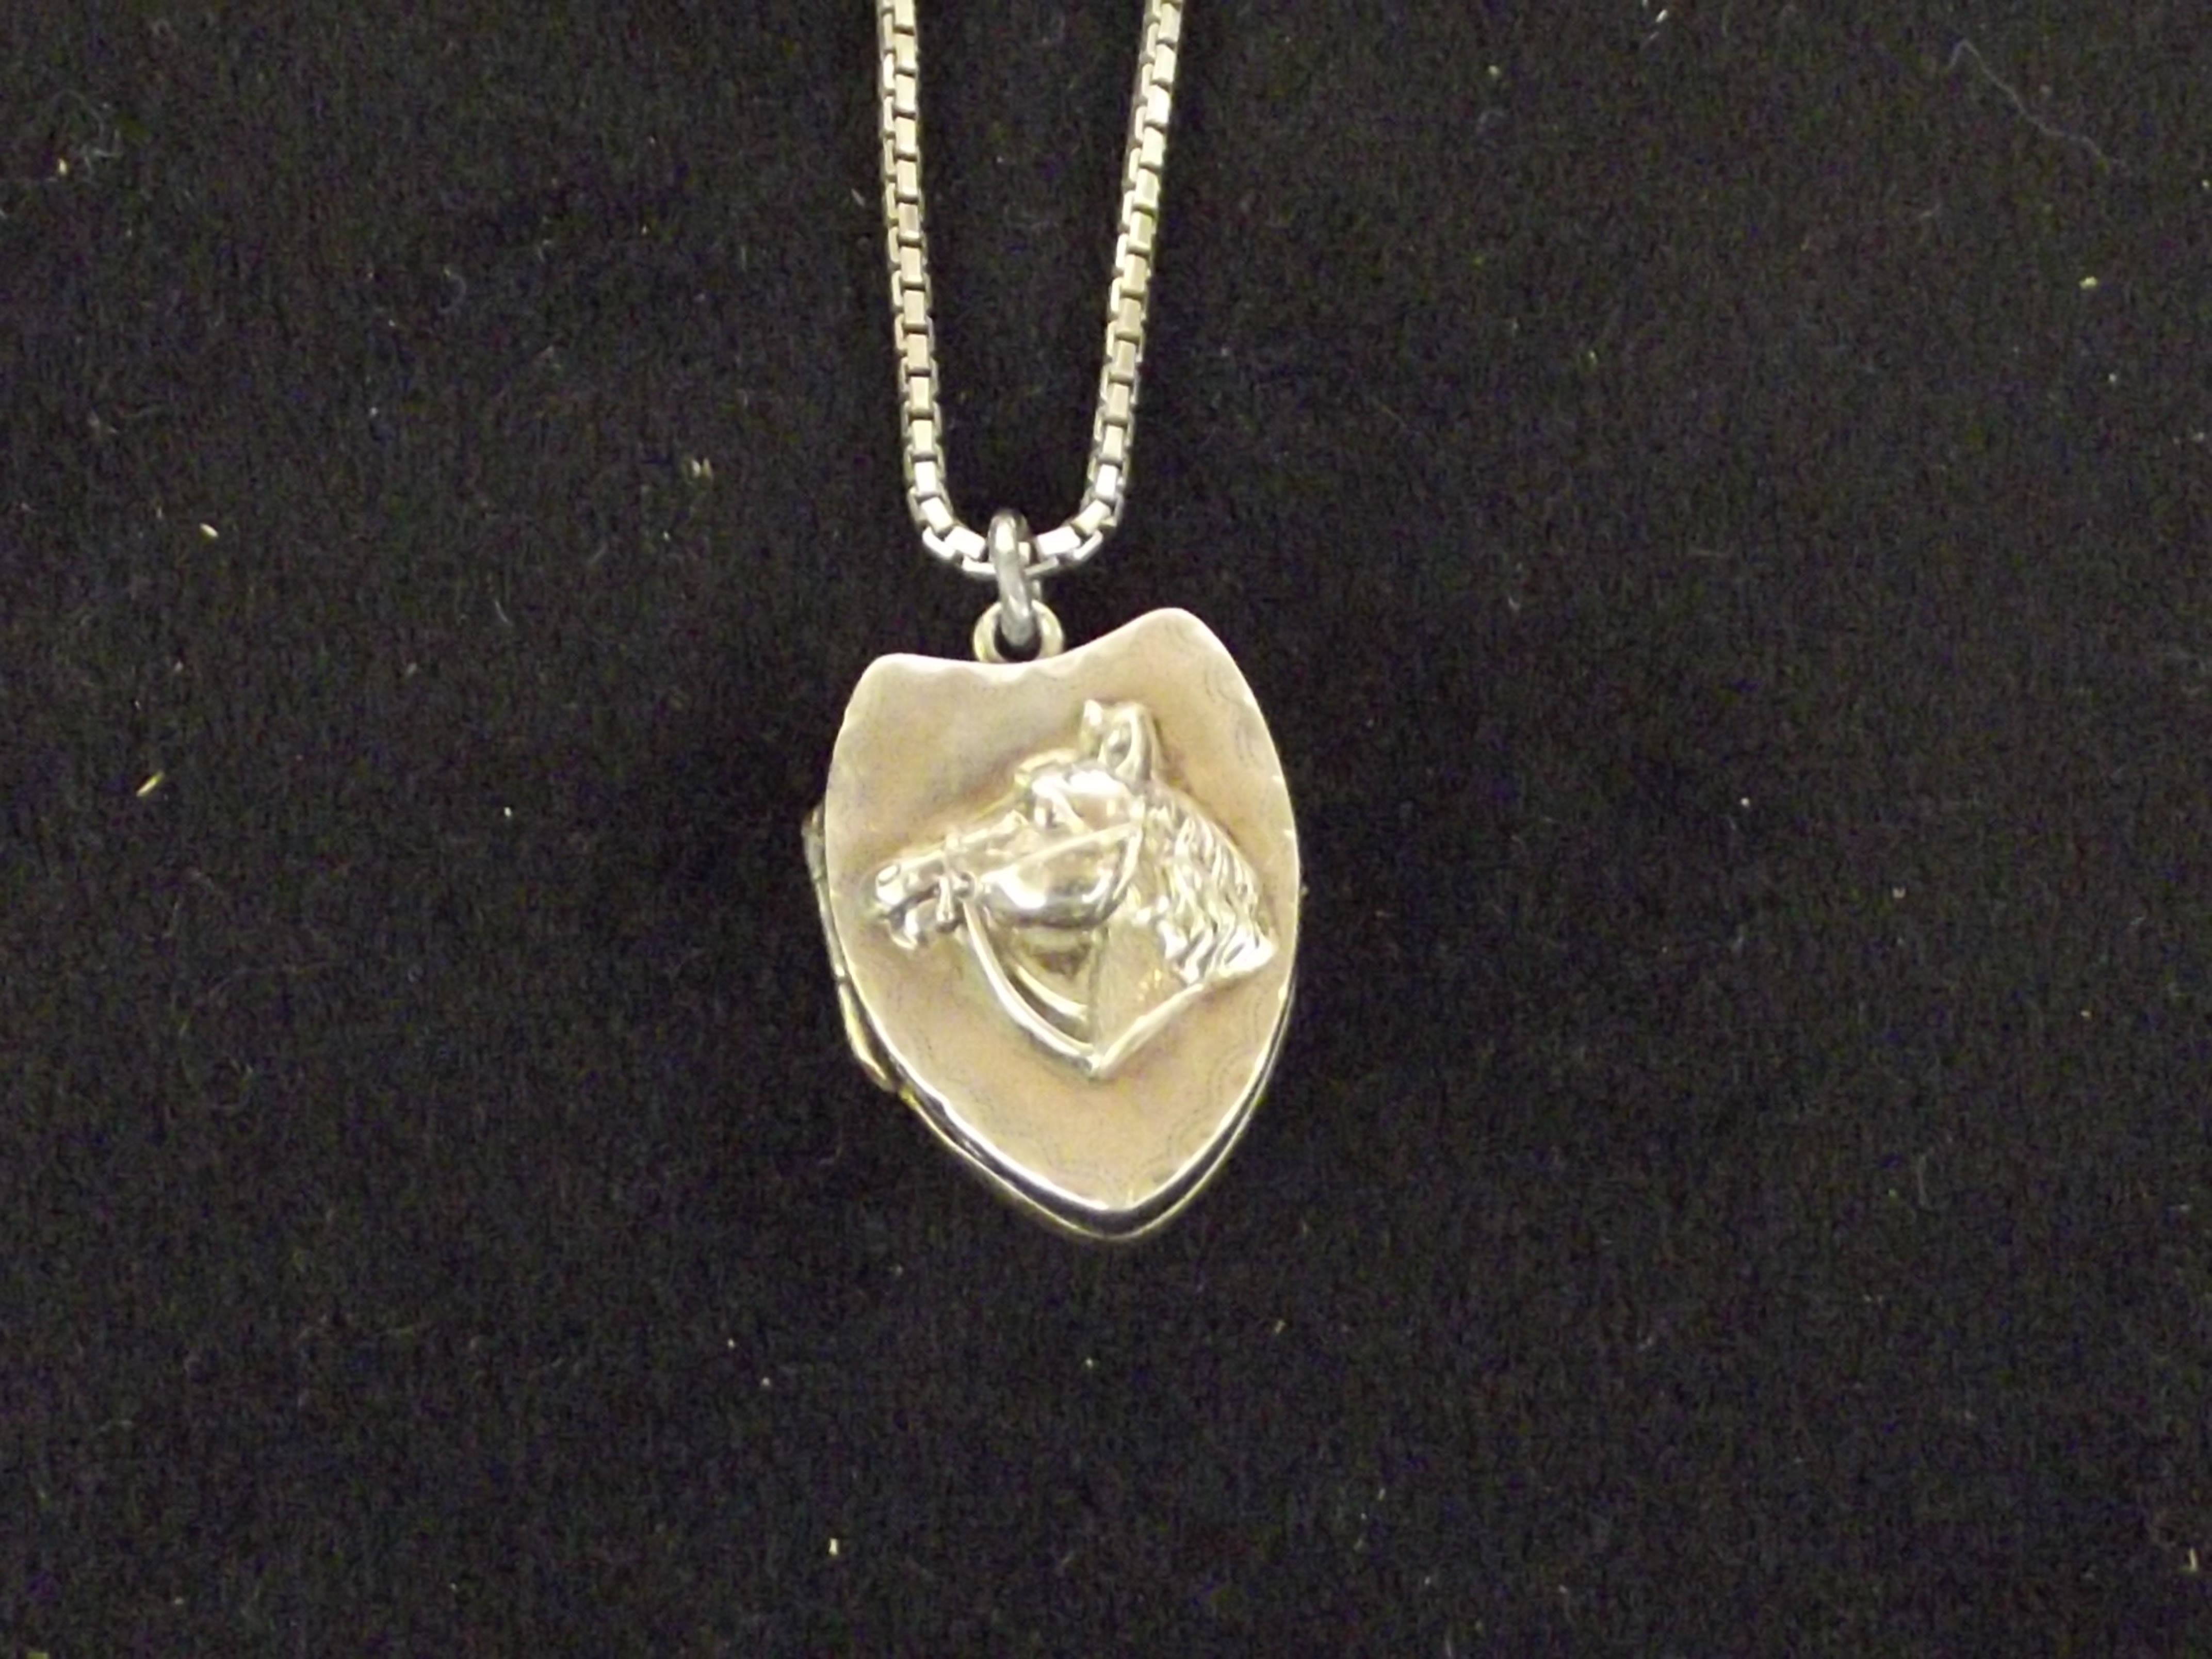 Silver chain and horse locket pendant